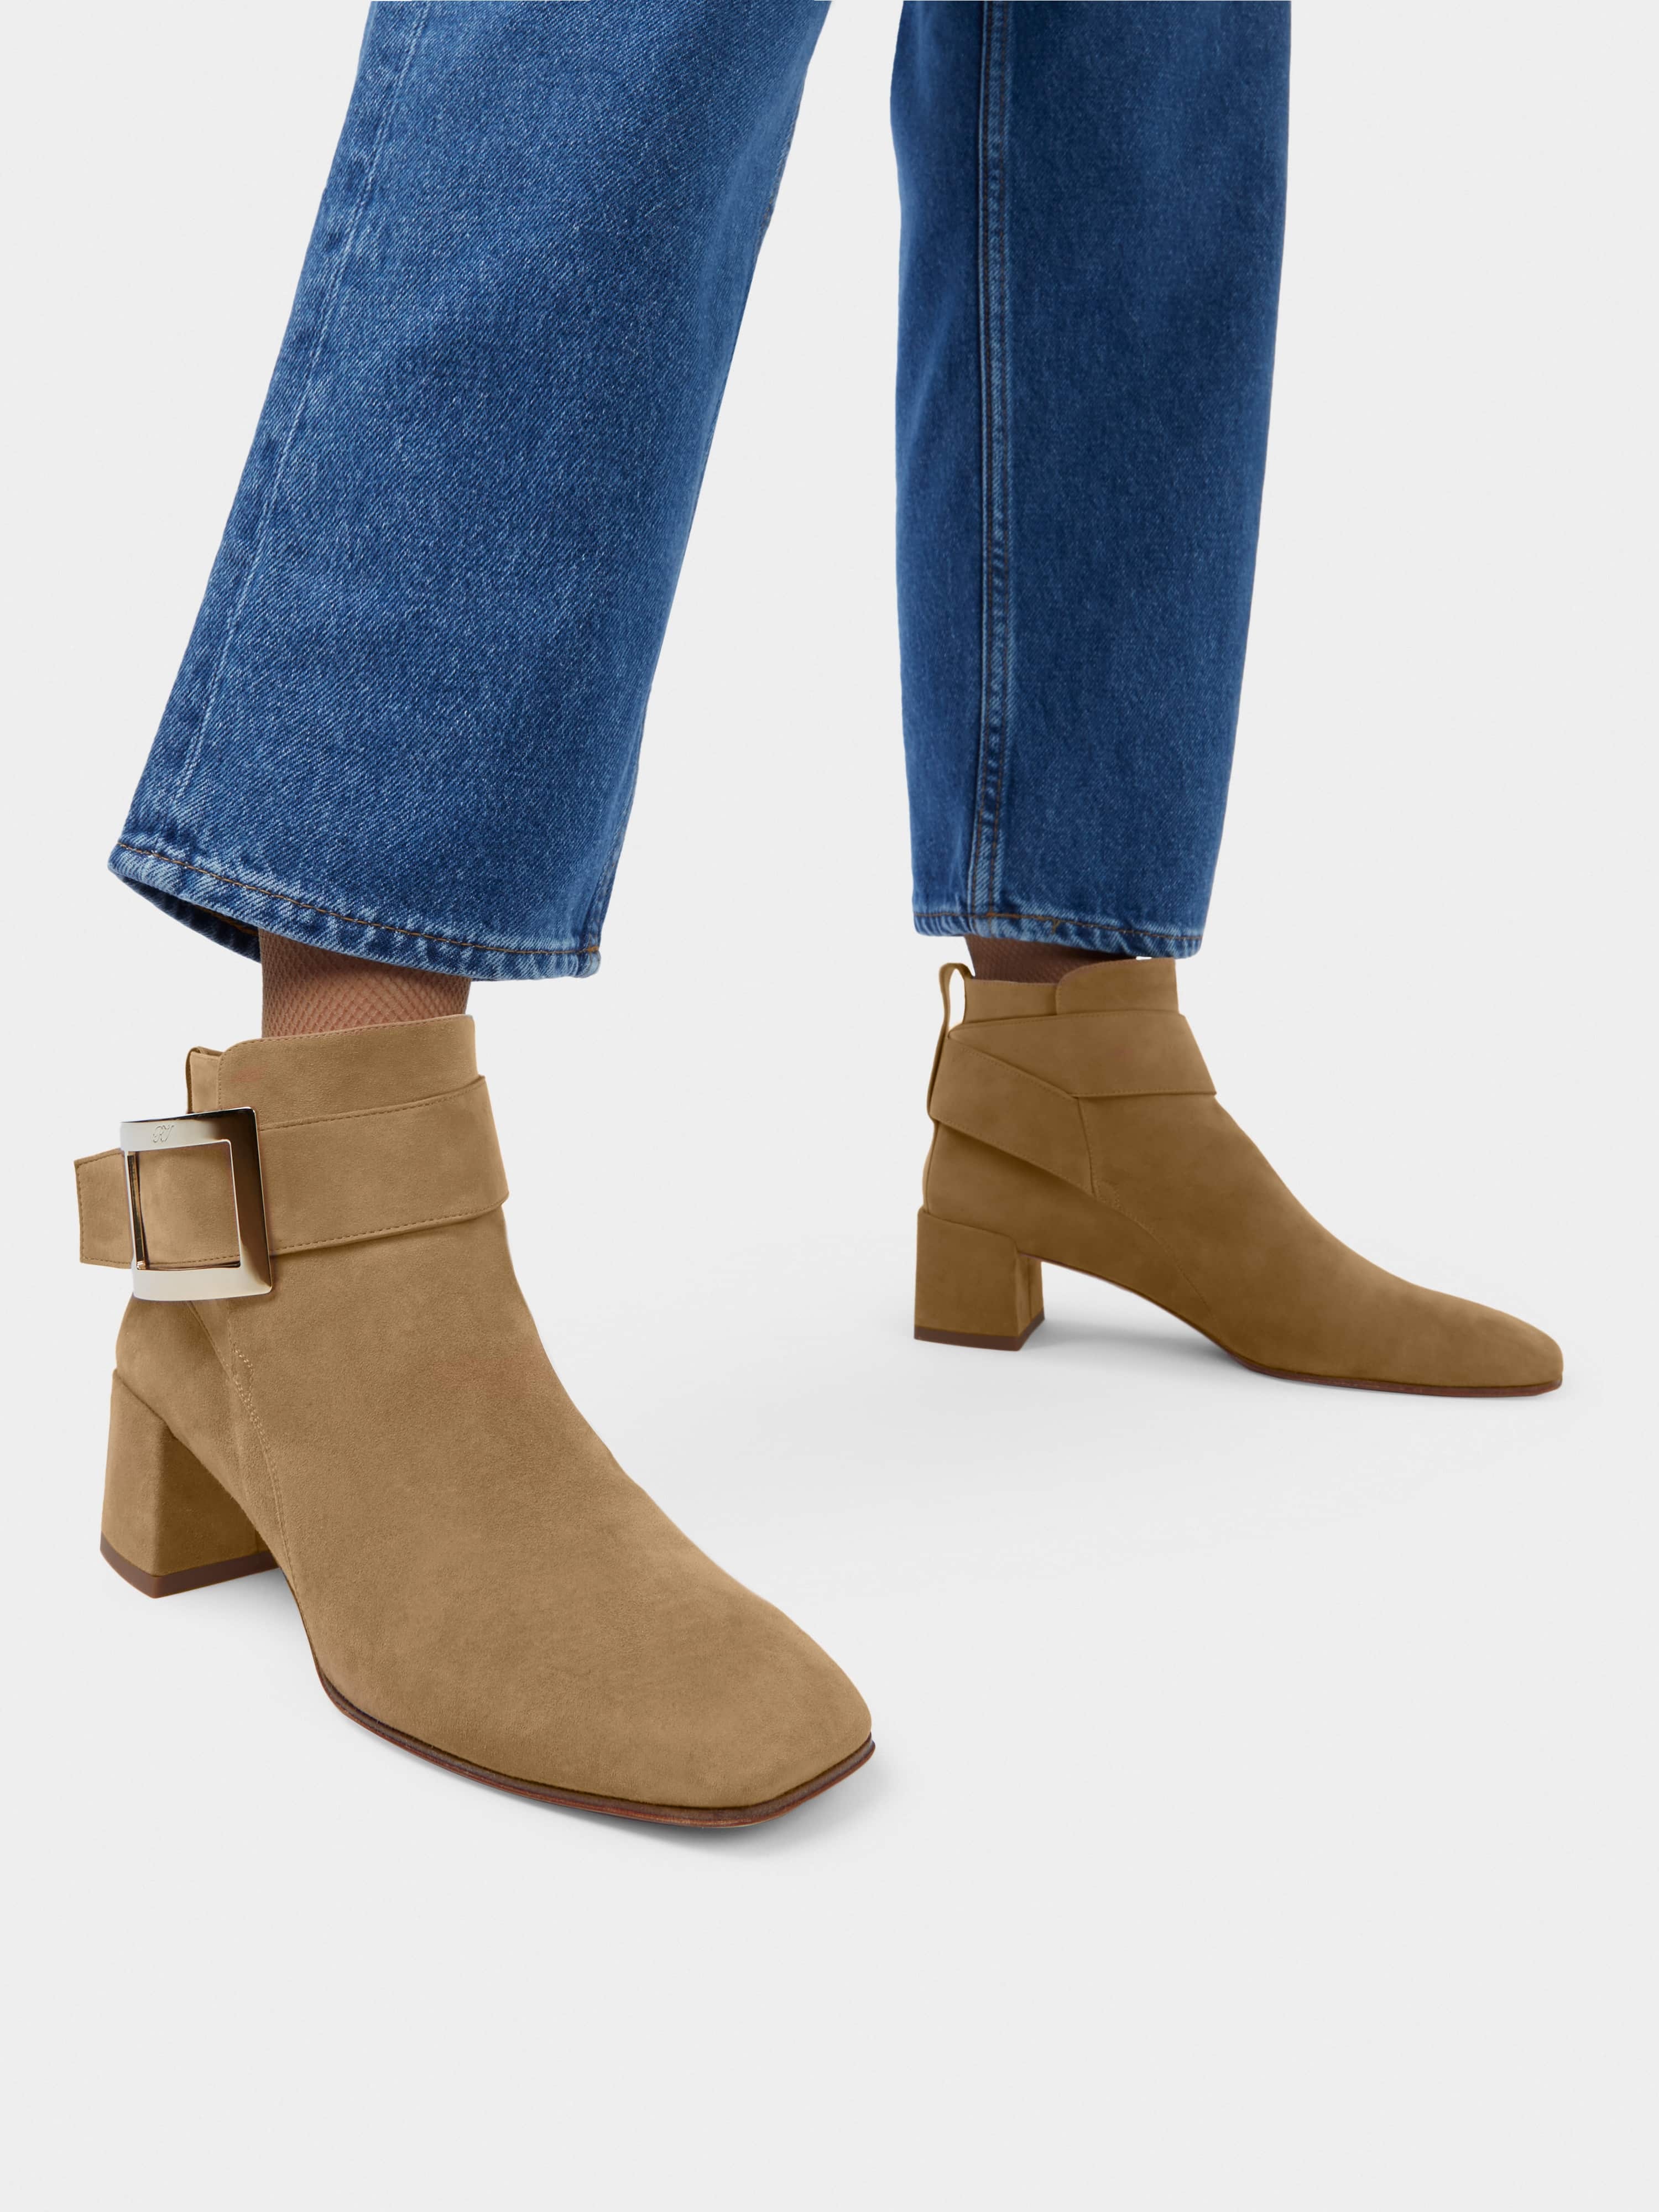 So Vivier Metal Buckle Ankle Boots in Suede - 2